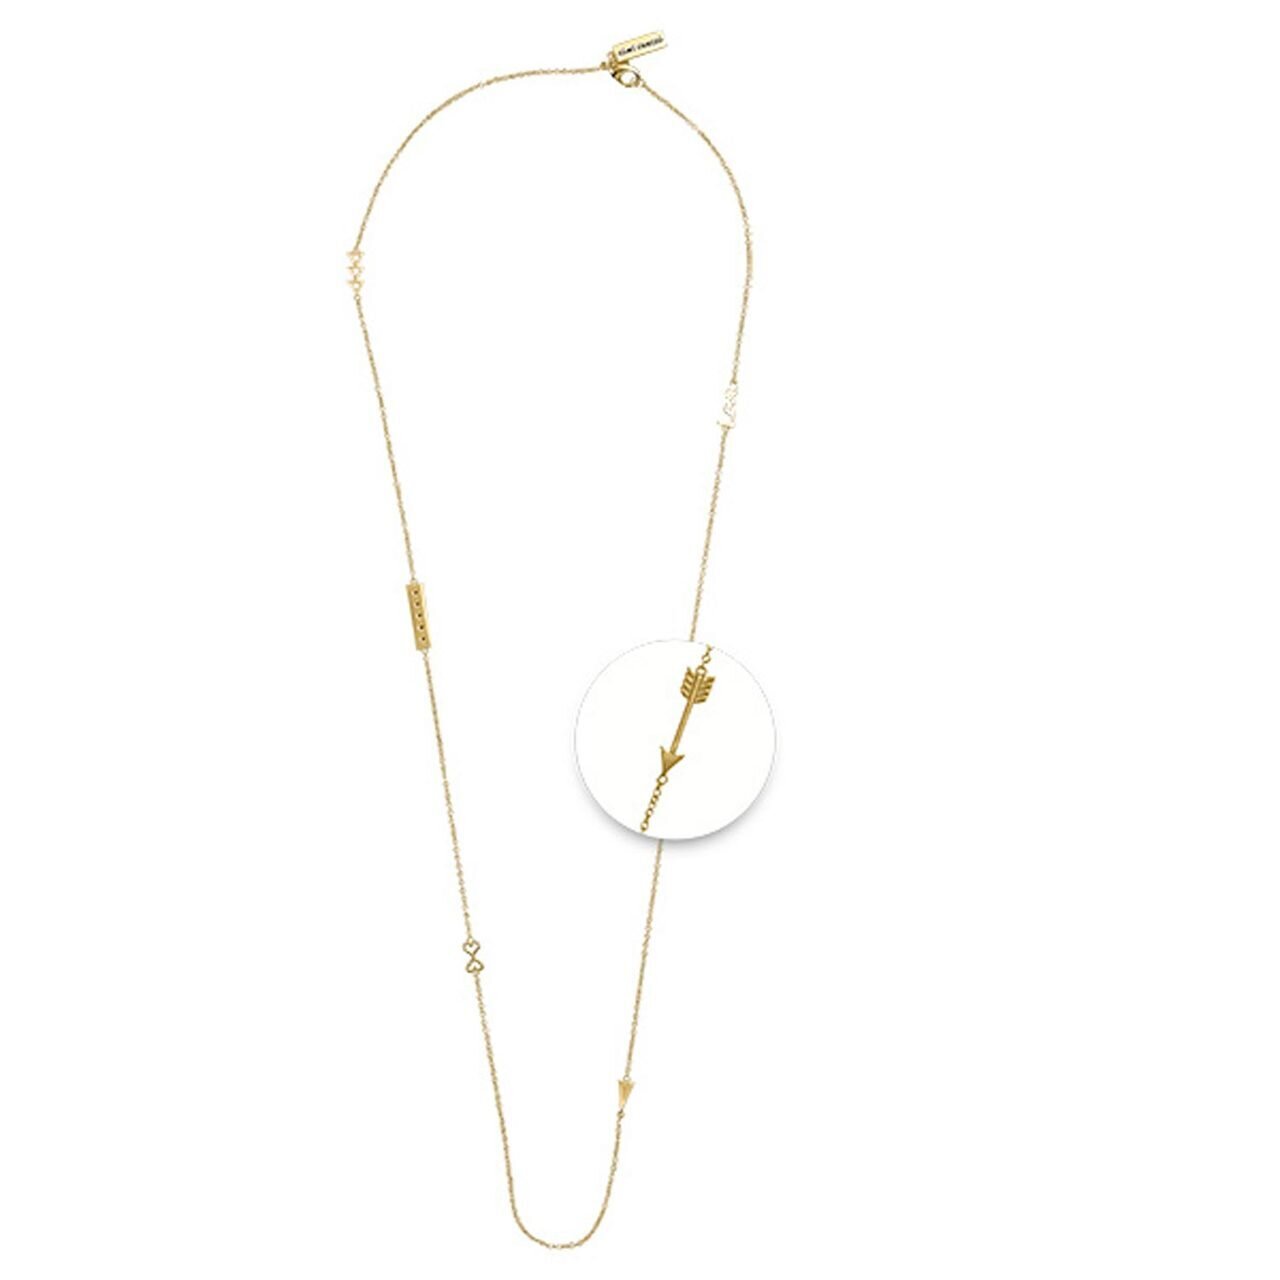 Nikki Lissoni Statement Gold-plated Necklace 60cm Compatible with Pendant N1031G60